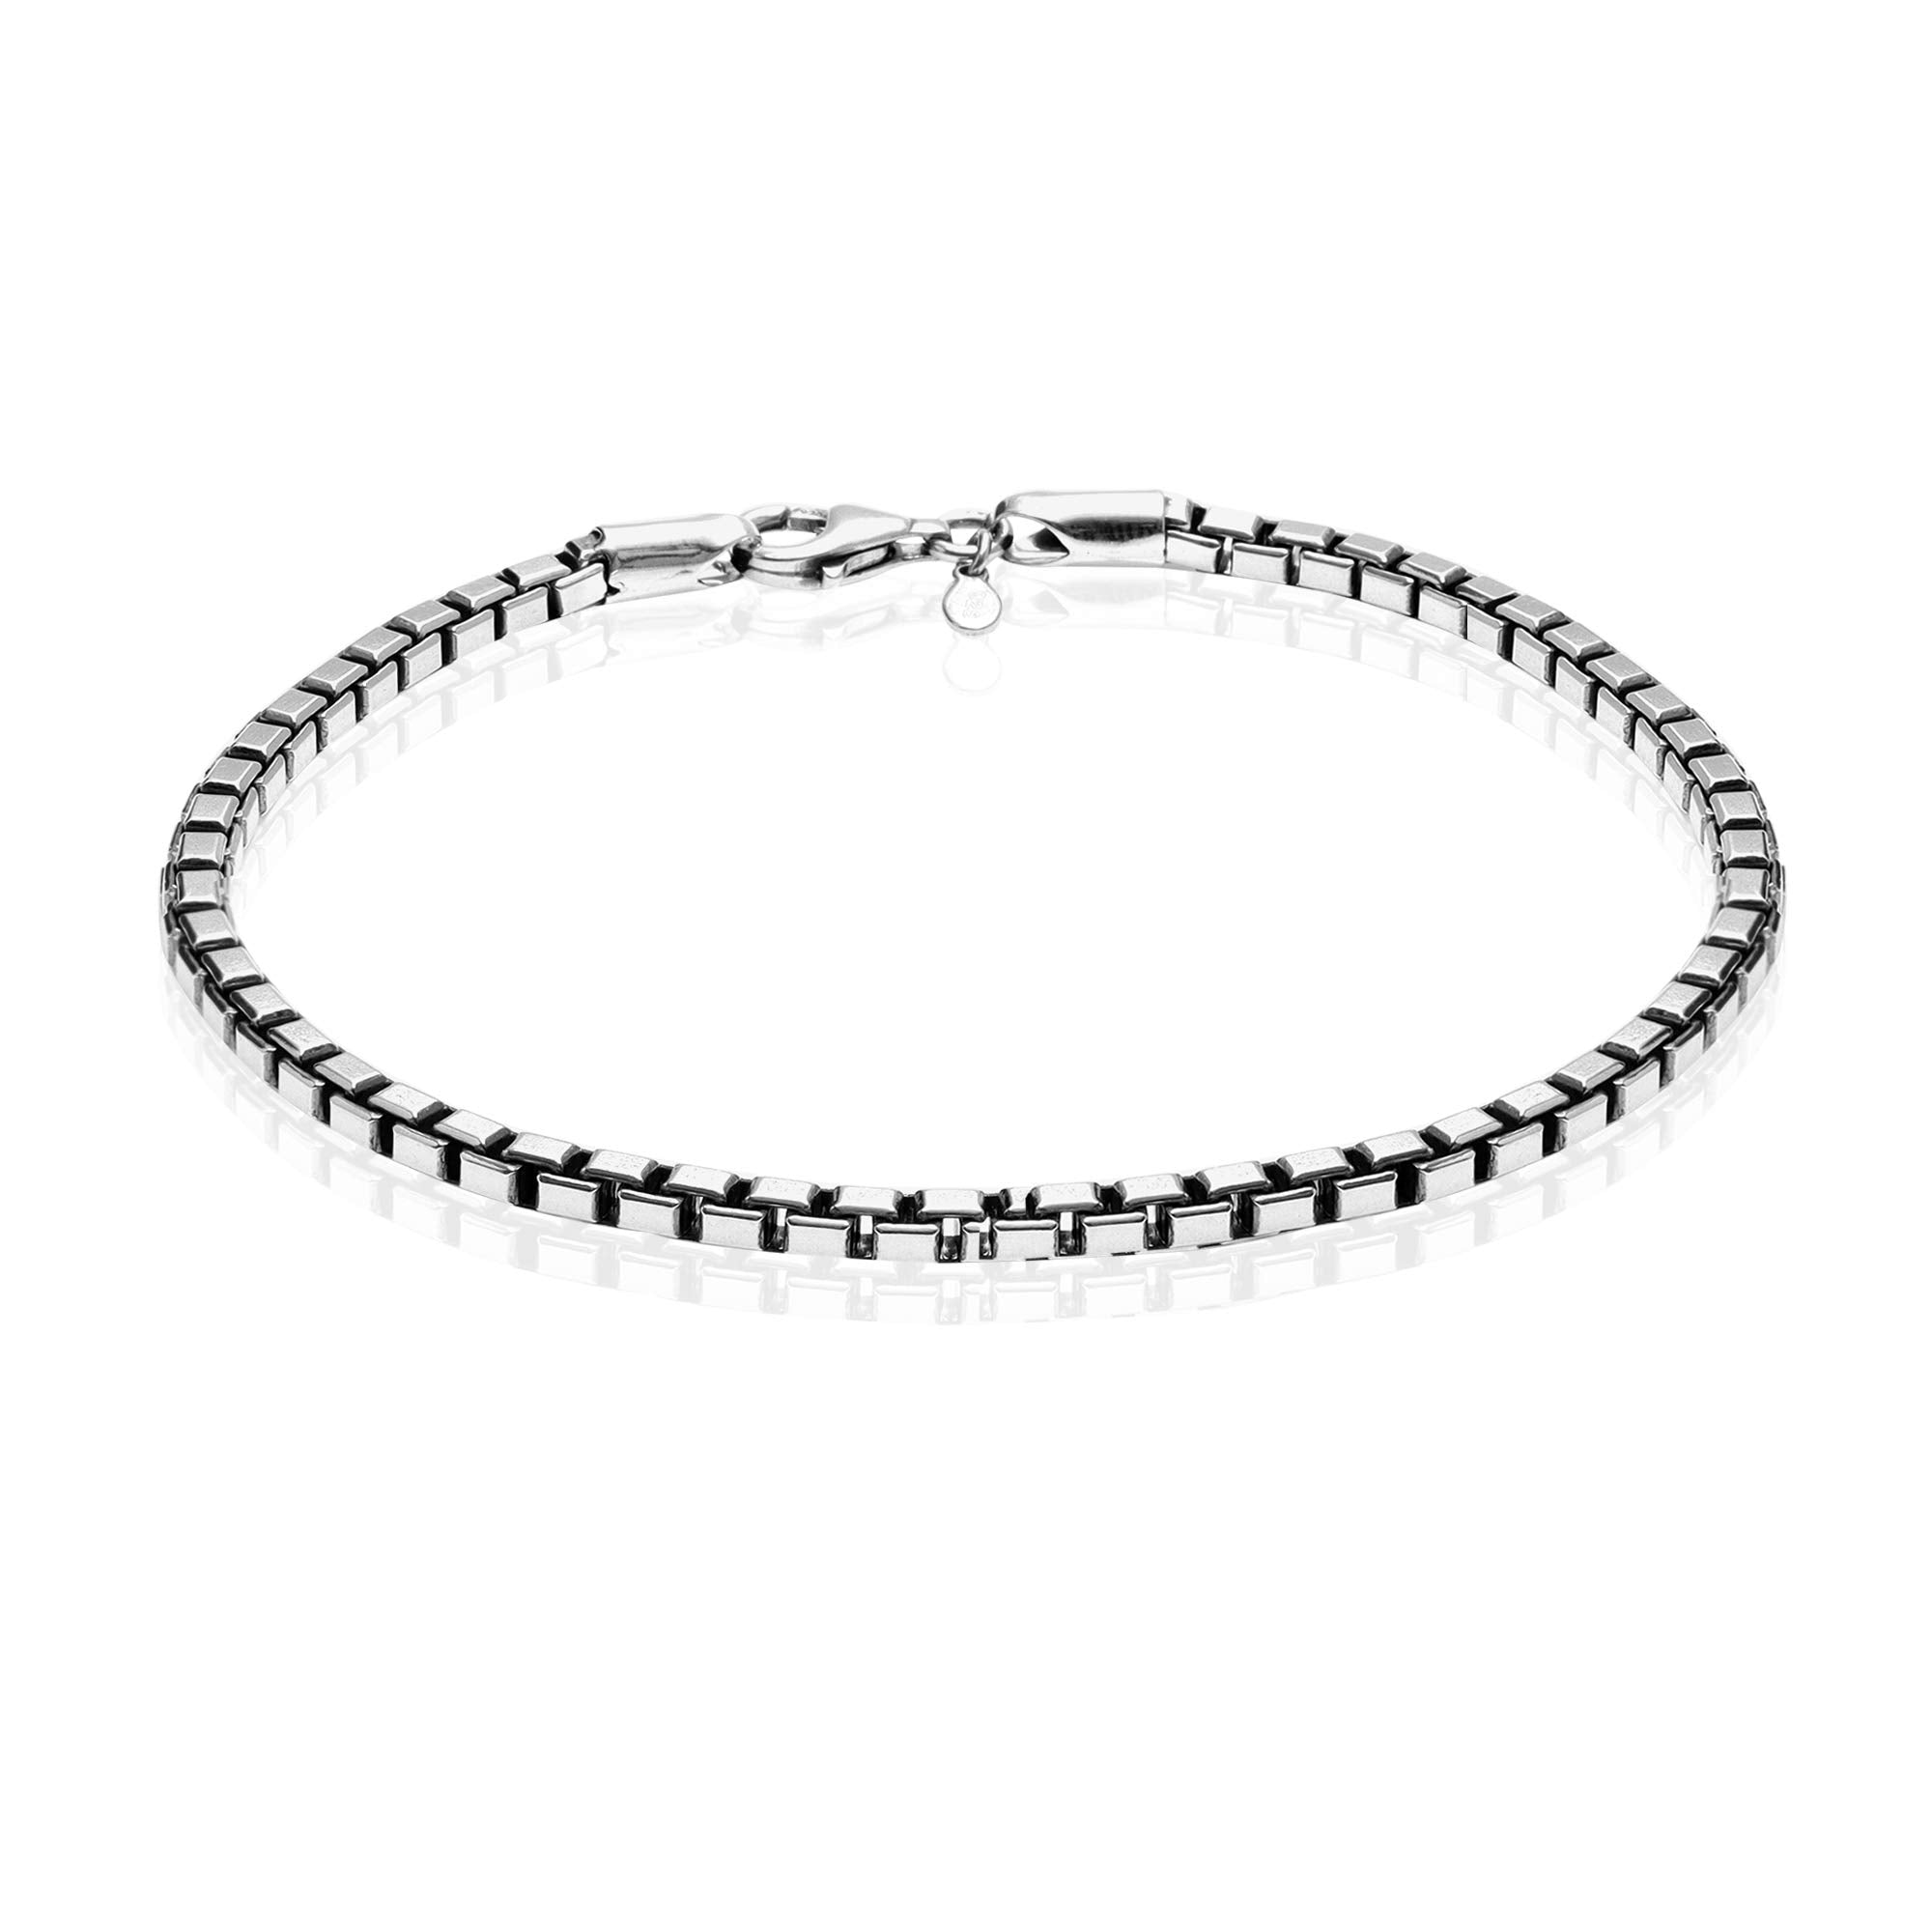 LeCalla Links Sterling Silver Jewelry 3.5 MM Box Chain Bracelet for Men and Women (8.5, 9 Inches)